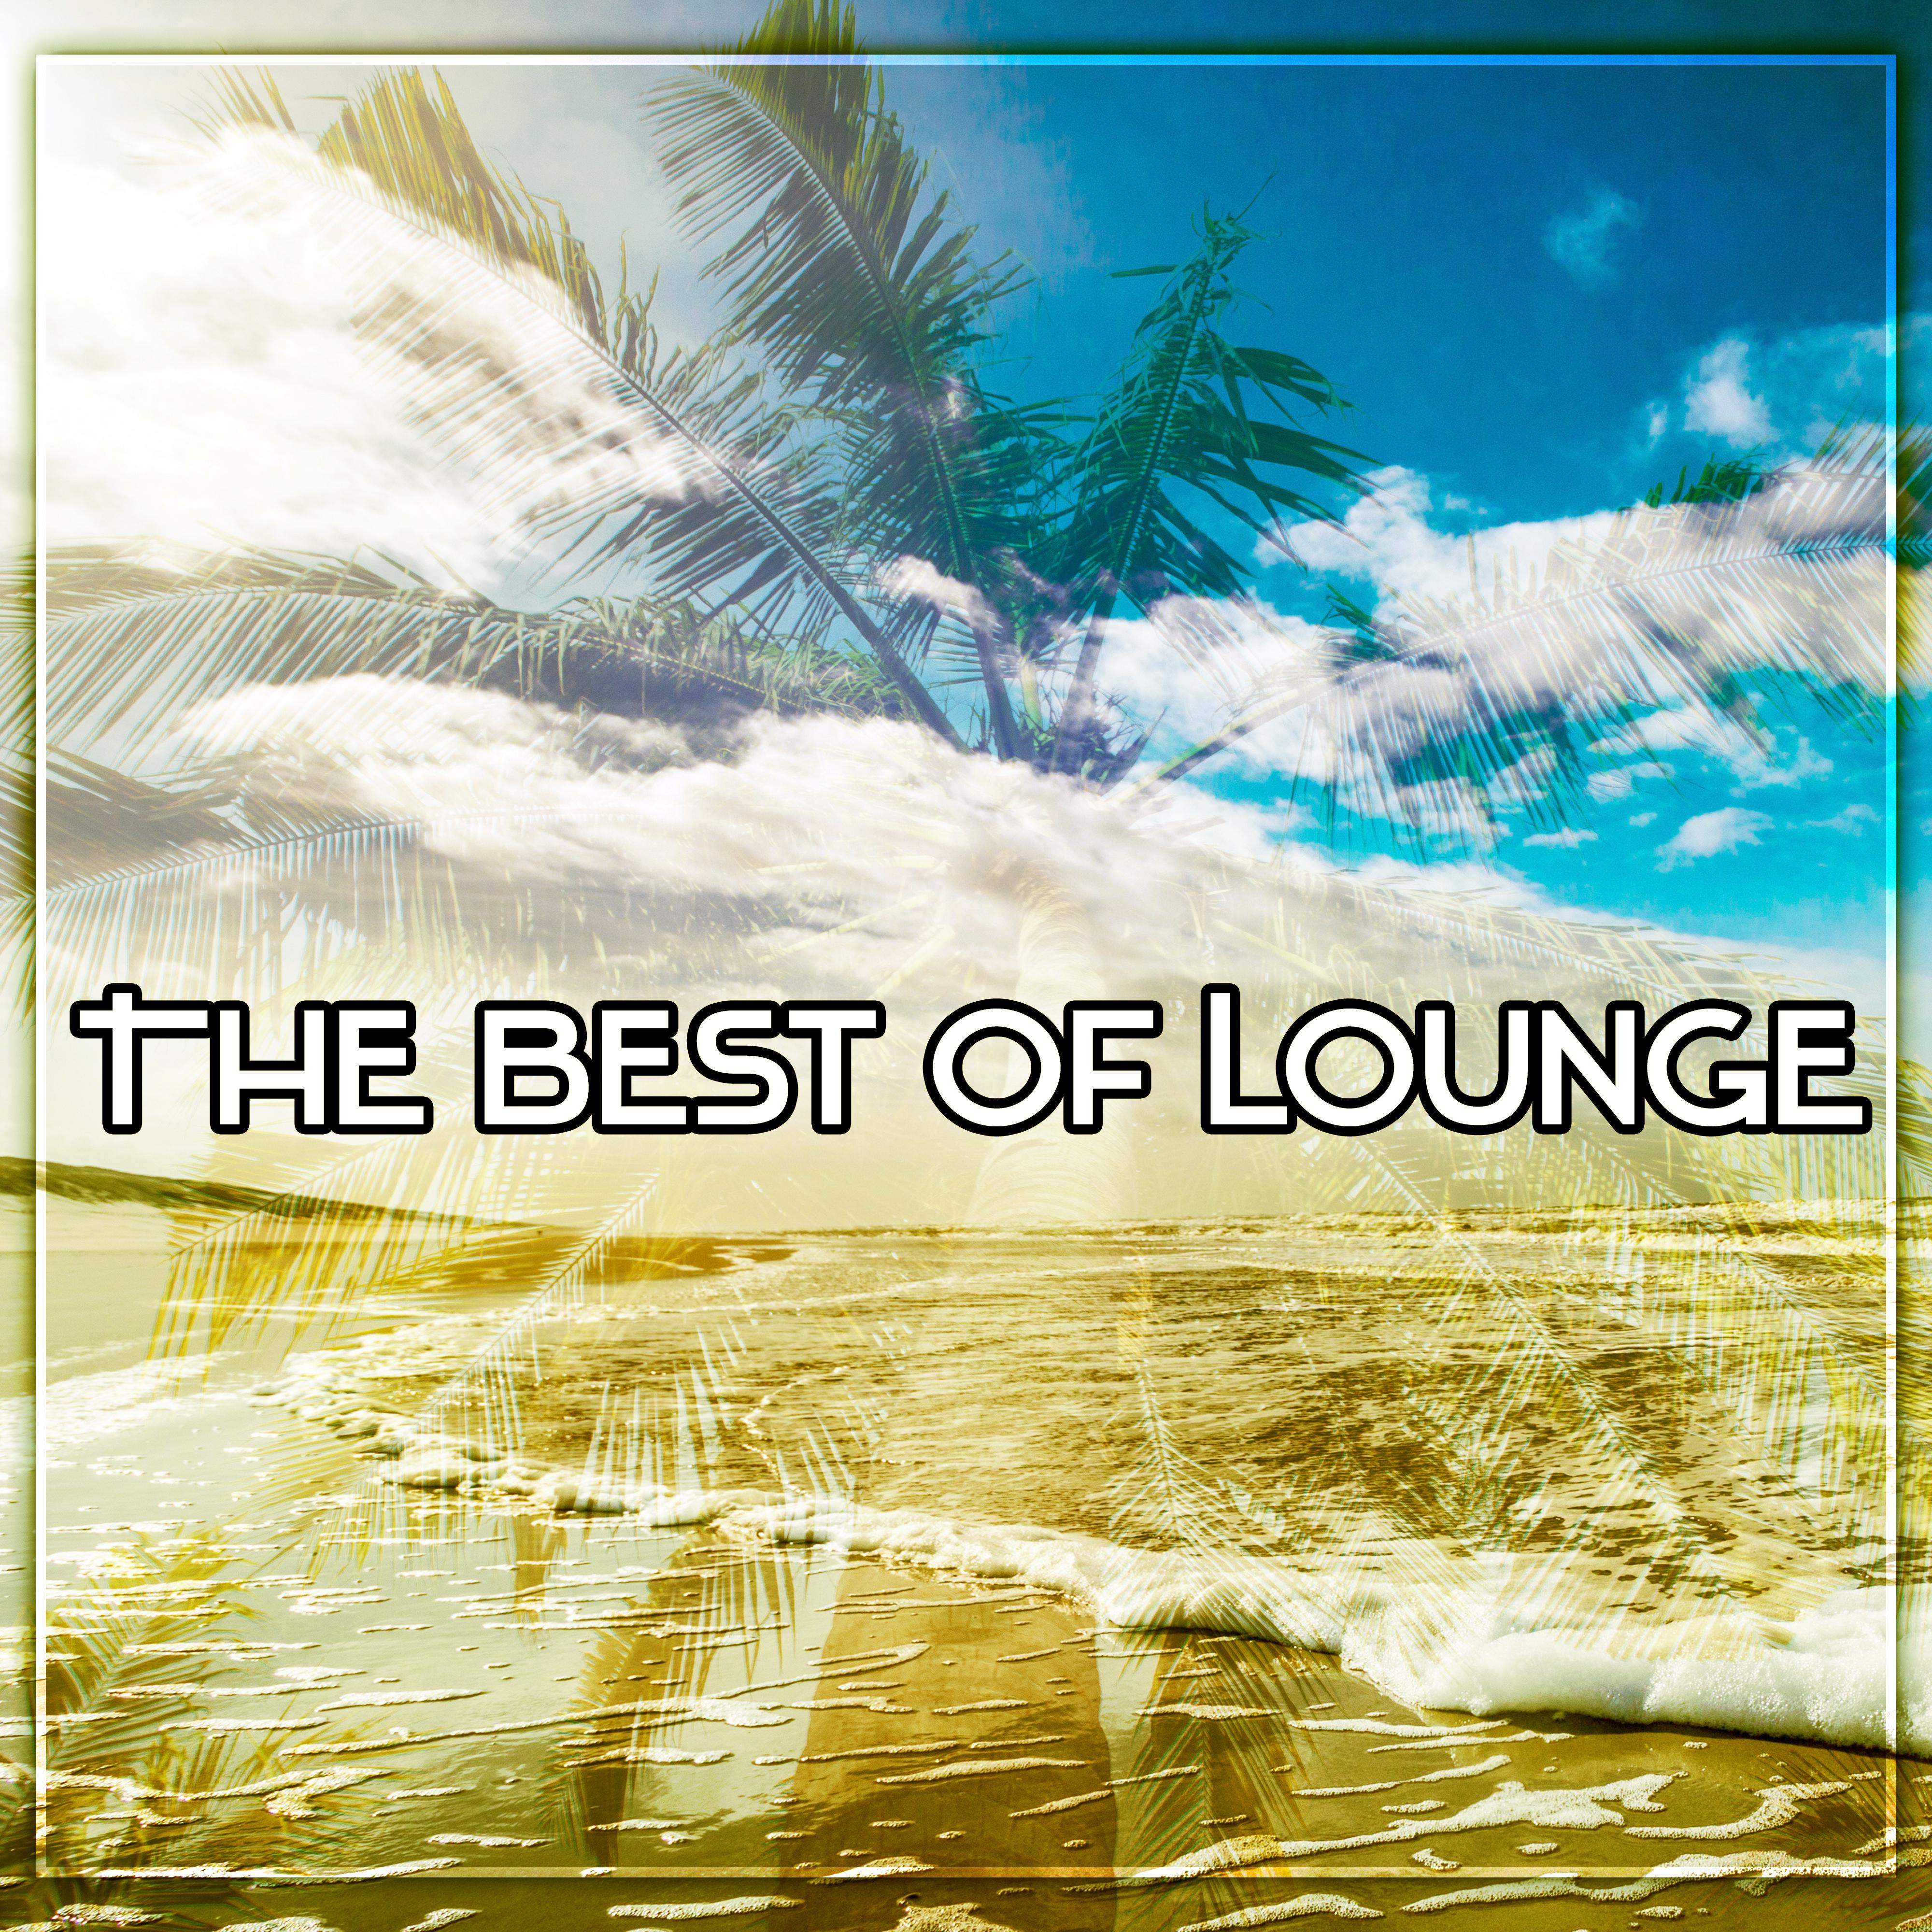 The Best of Lounge  Dreamer Lounge, Soft Chill Lounge Music